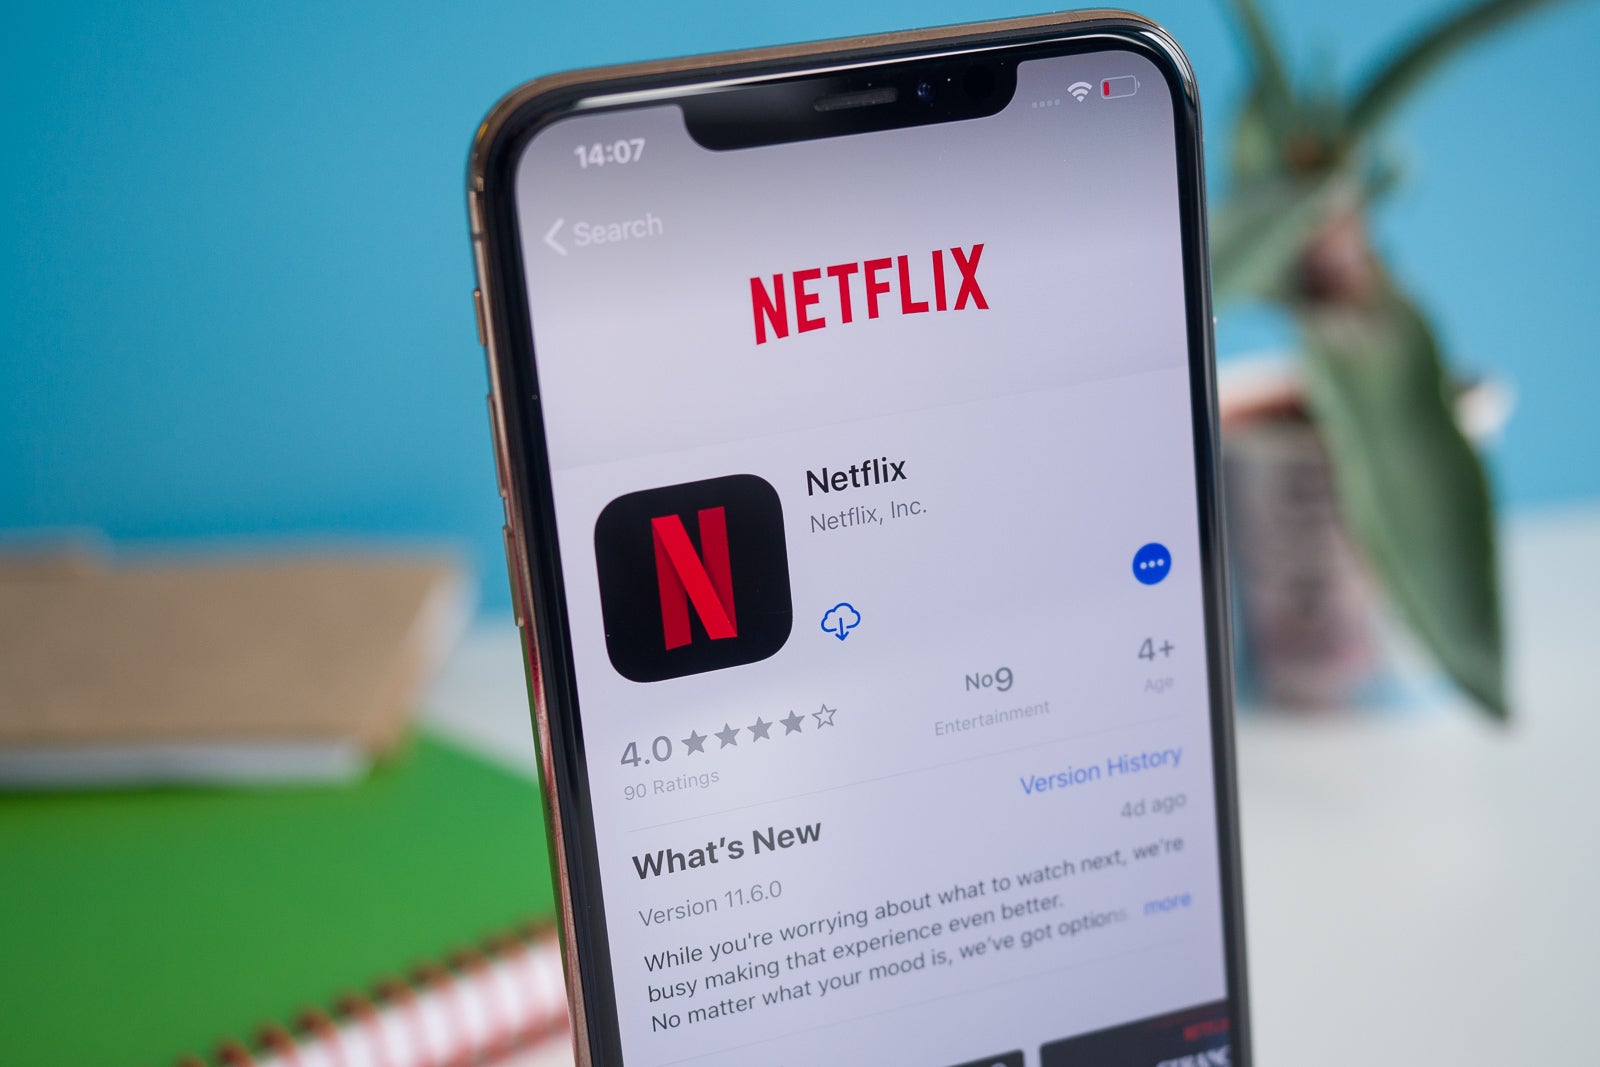 It's all fun and games. Netflix isn't only about movies and TV-series anymore - Netflix Games is now available for iOS and iPadOS